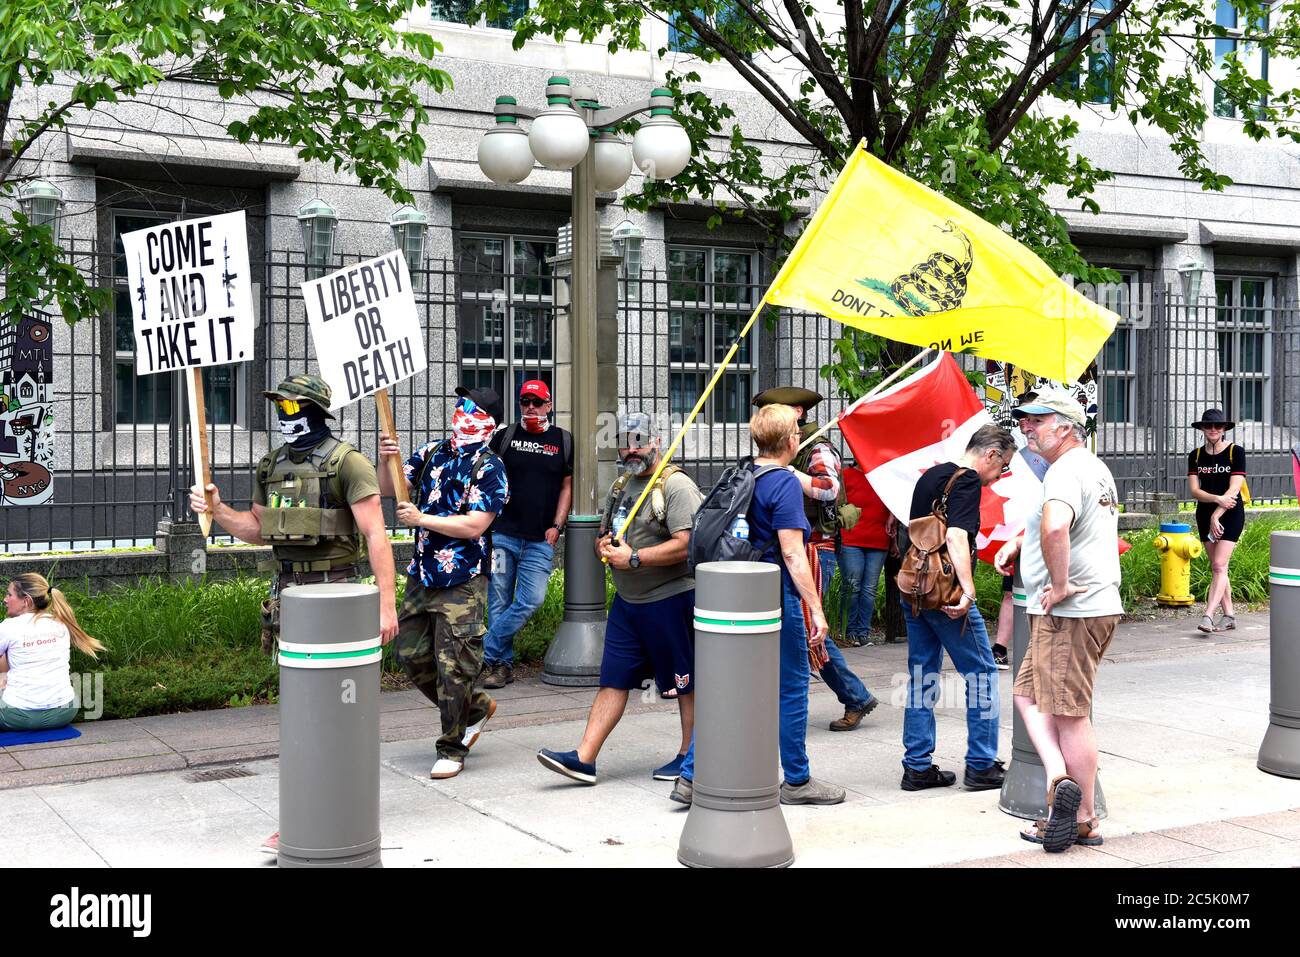 Ottawa, Canada - July 1, 2020: Pro-gun and covid-19 lockdown protesters protest in front of the US Embassy. The annual Canada Day festivities were cancelled due to the Coronavirus pandemic so many used the opportunity to protest their causes on Parliament Hill and the Embassy. Stock Photo